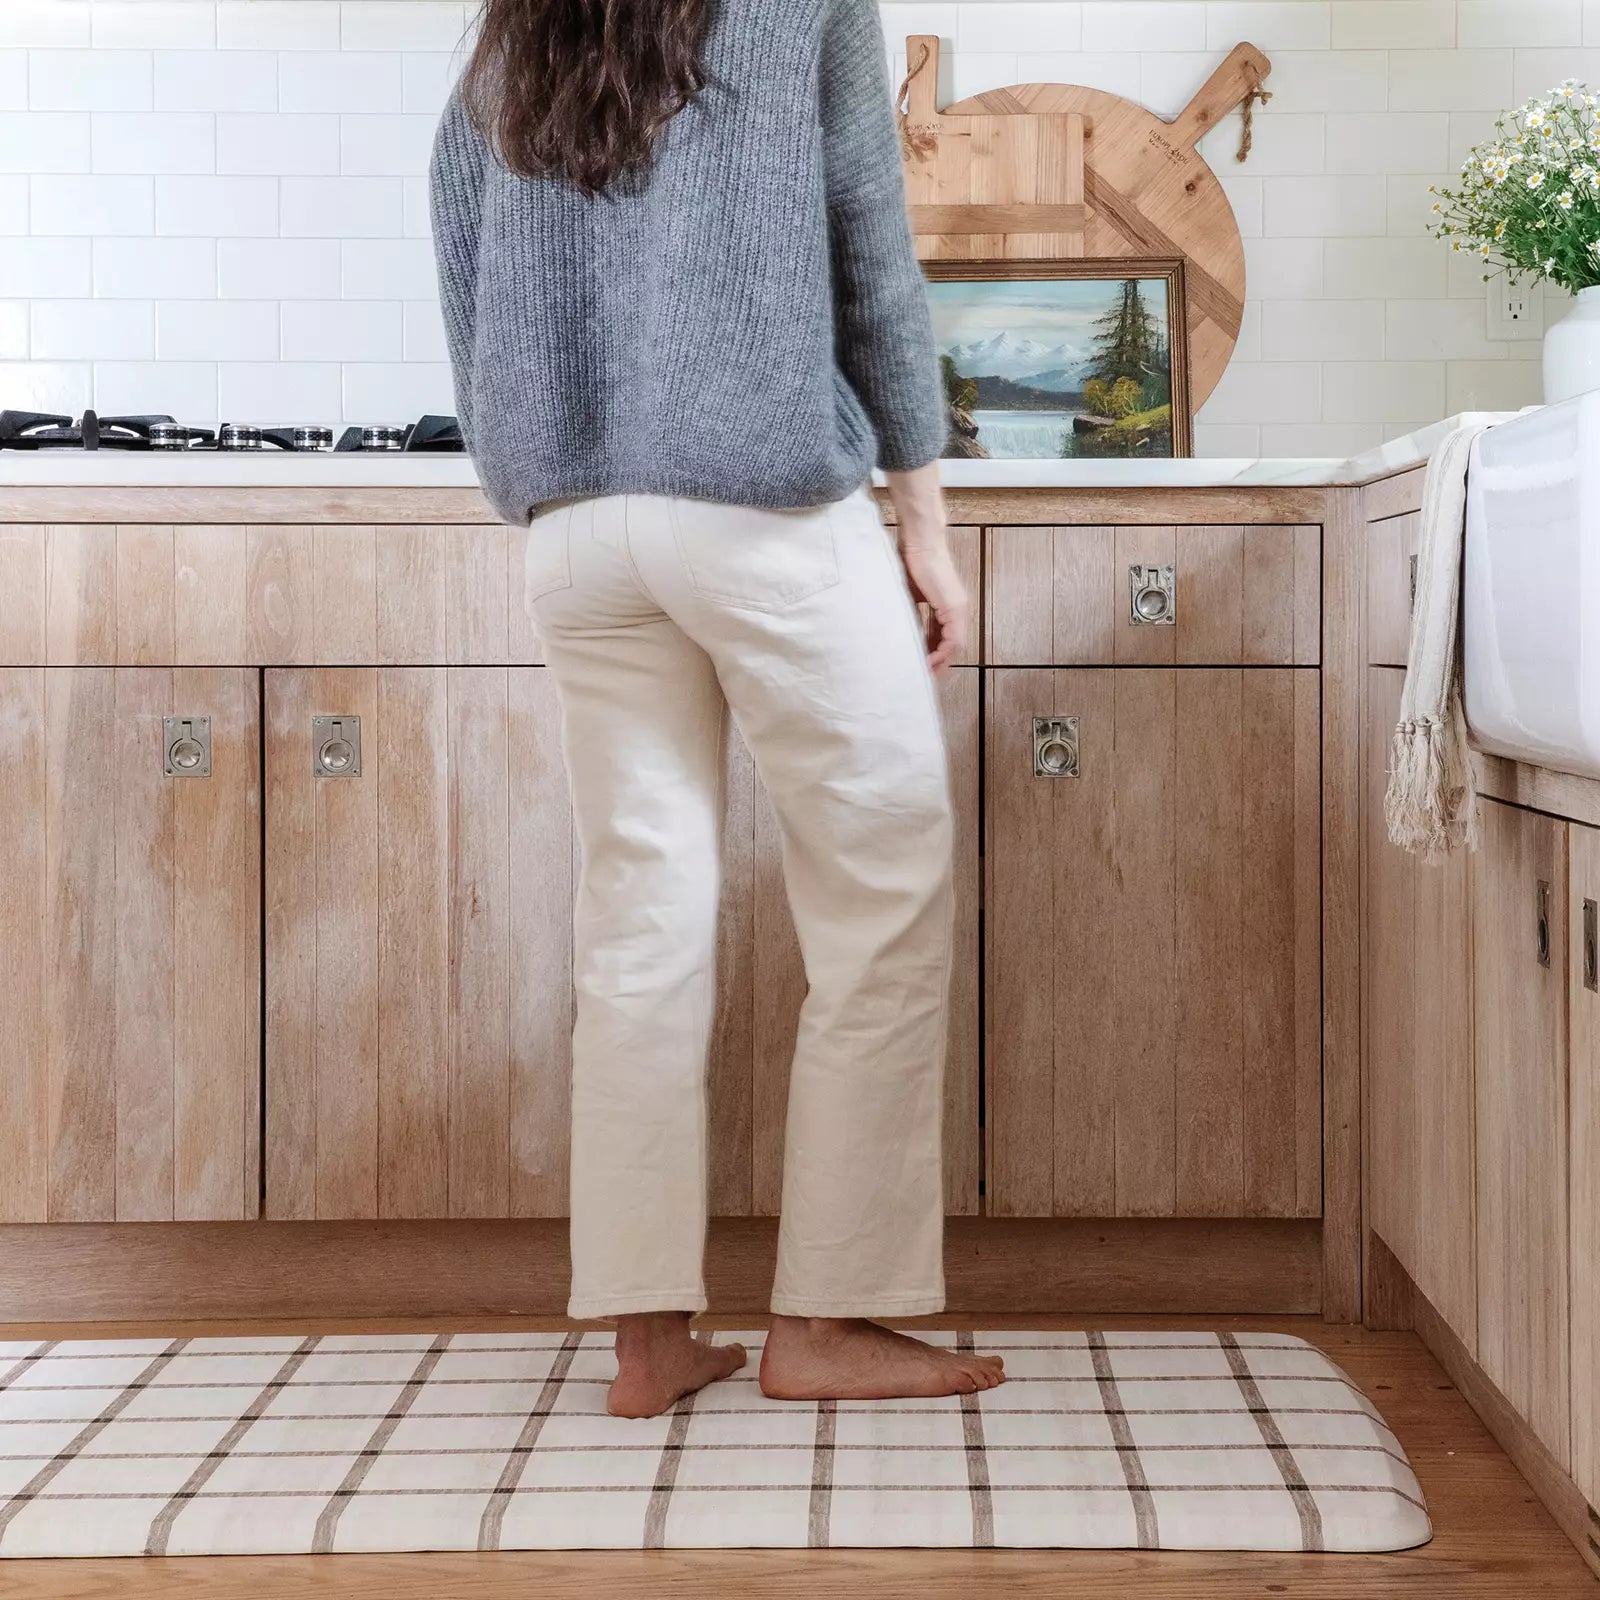 Windowpane neutral brown and white grid pattern standing mat. Shown in kitchen with woman cooking at counter